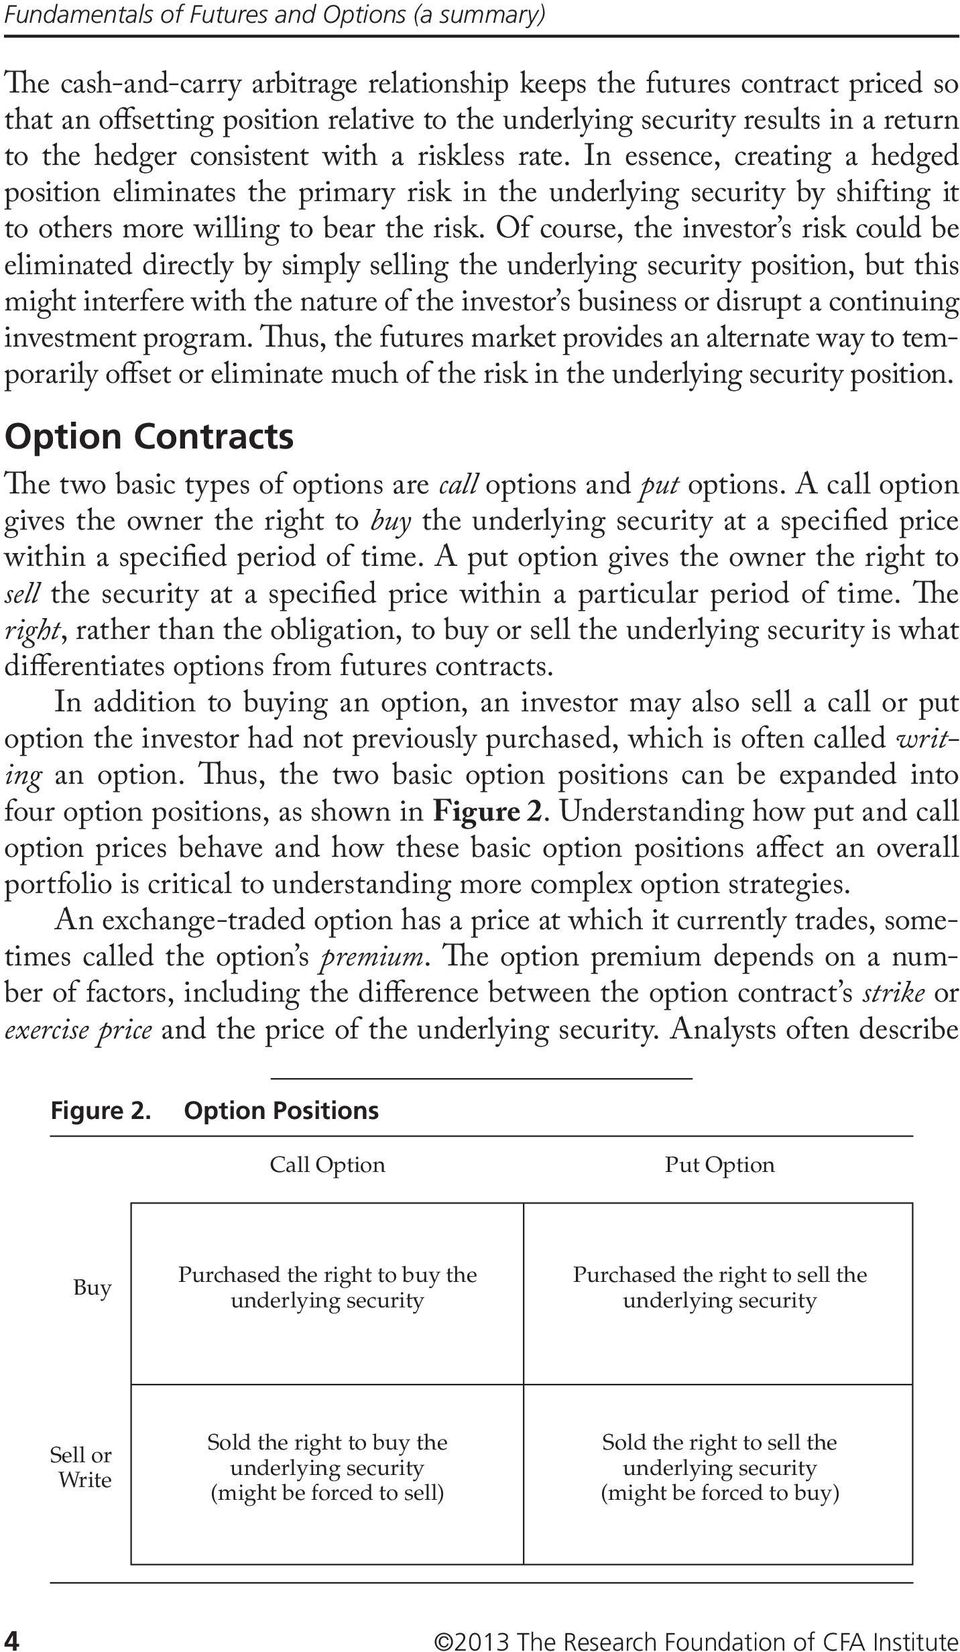 In essence, creating a hedged position eliminates the primary risk in the underlying security by shifting it to others more willing to bear the risk.